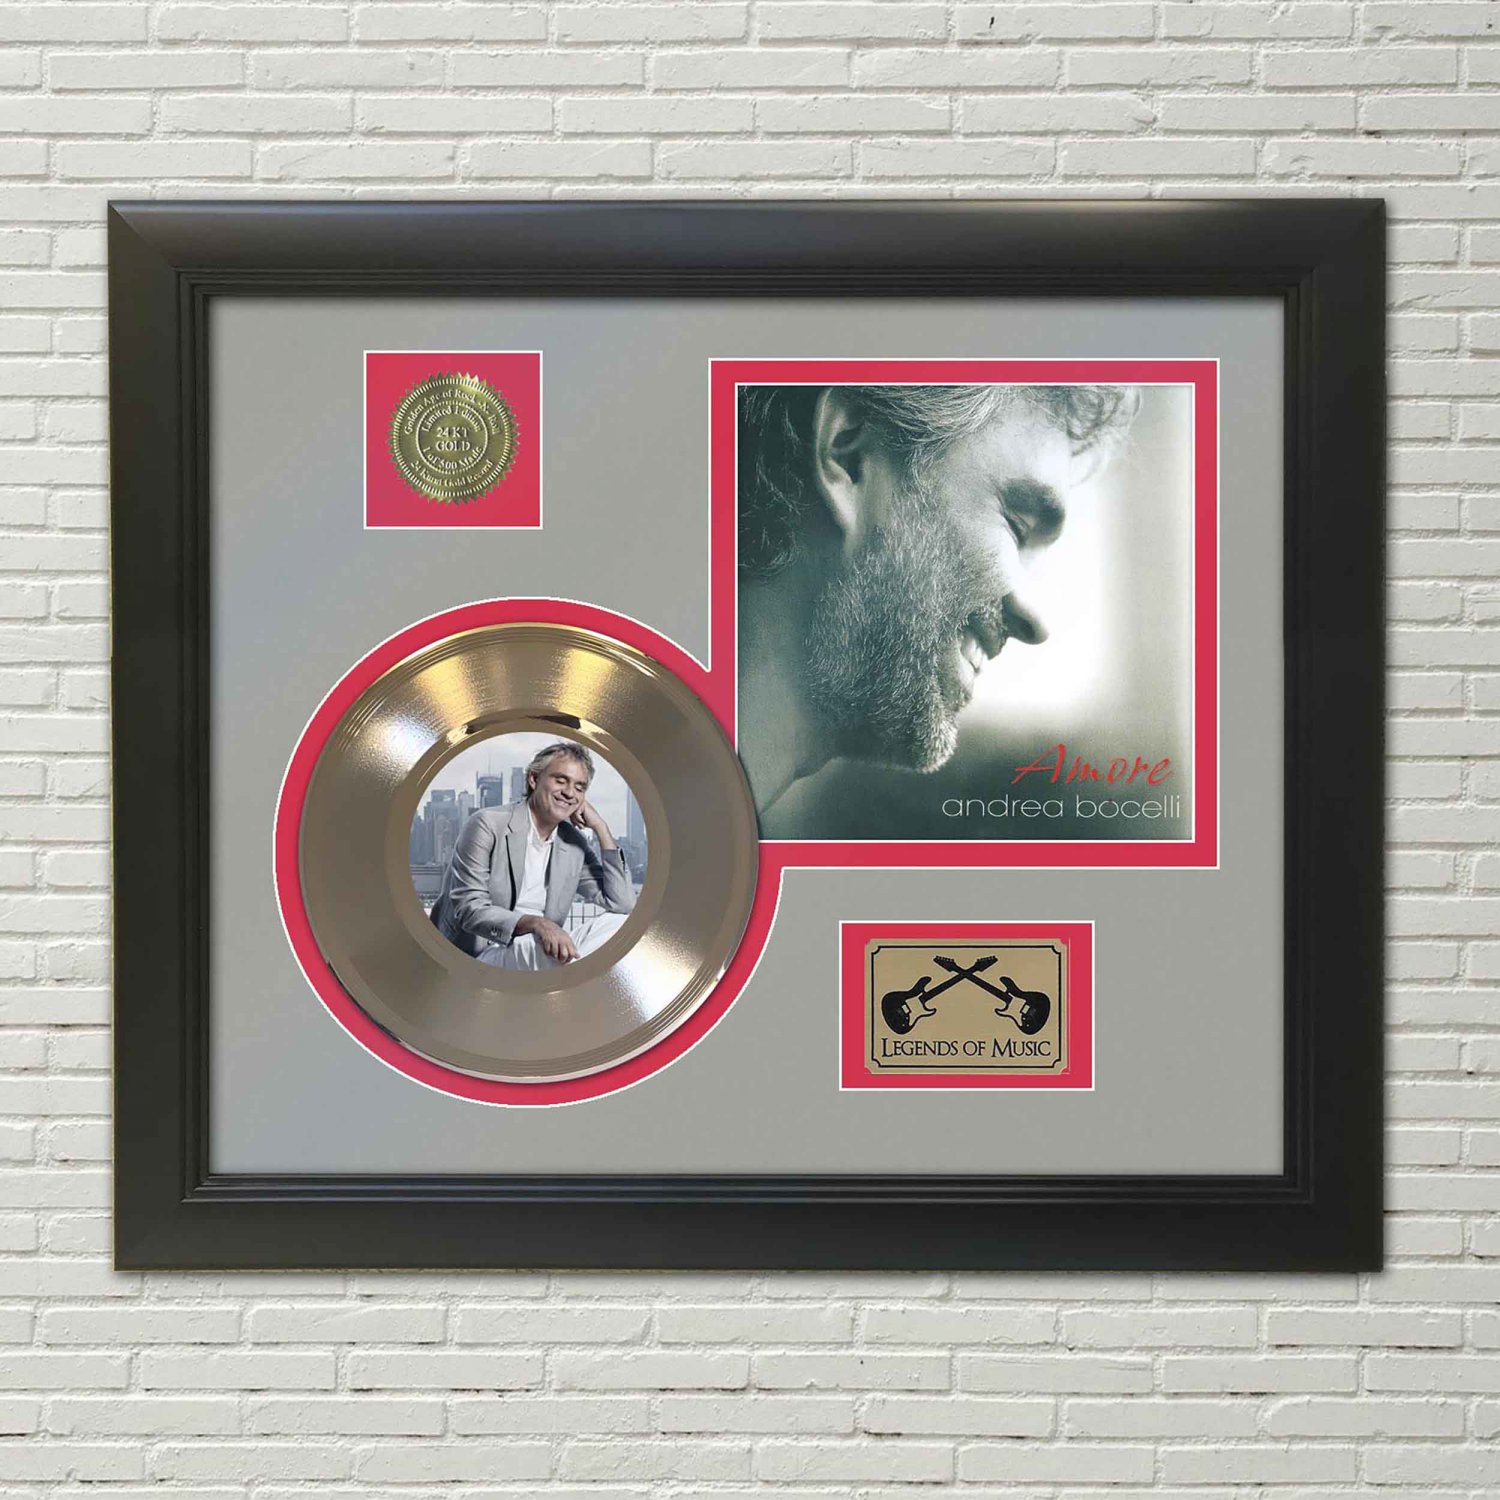 ANDREA BOCELLI "Amore" Framed Picture Sleeve Gold 45 Record Display